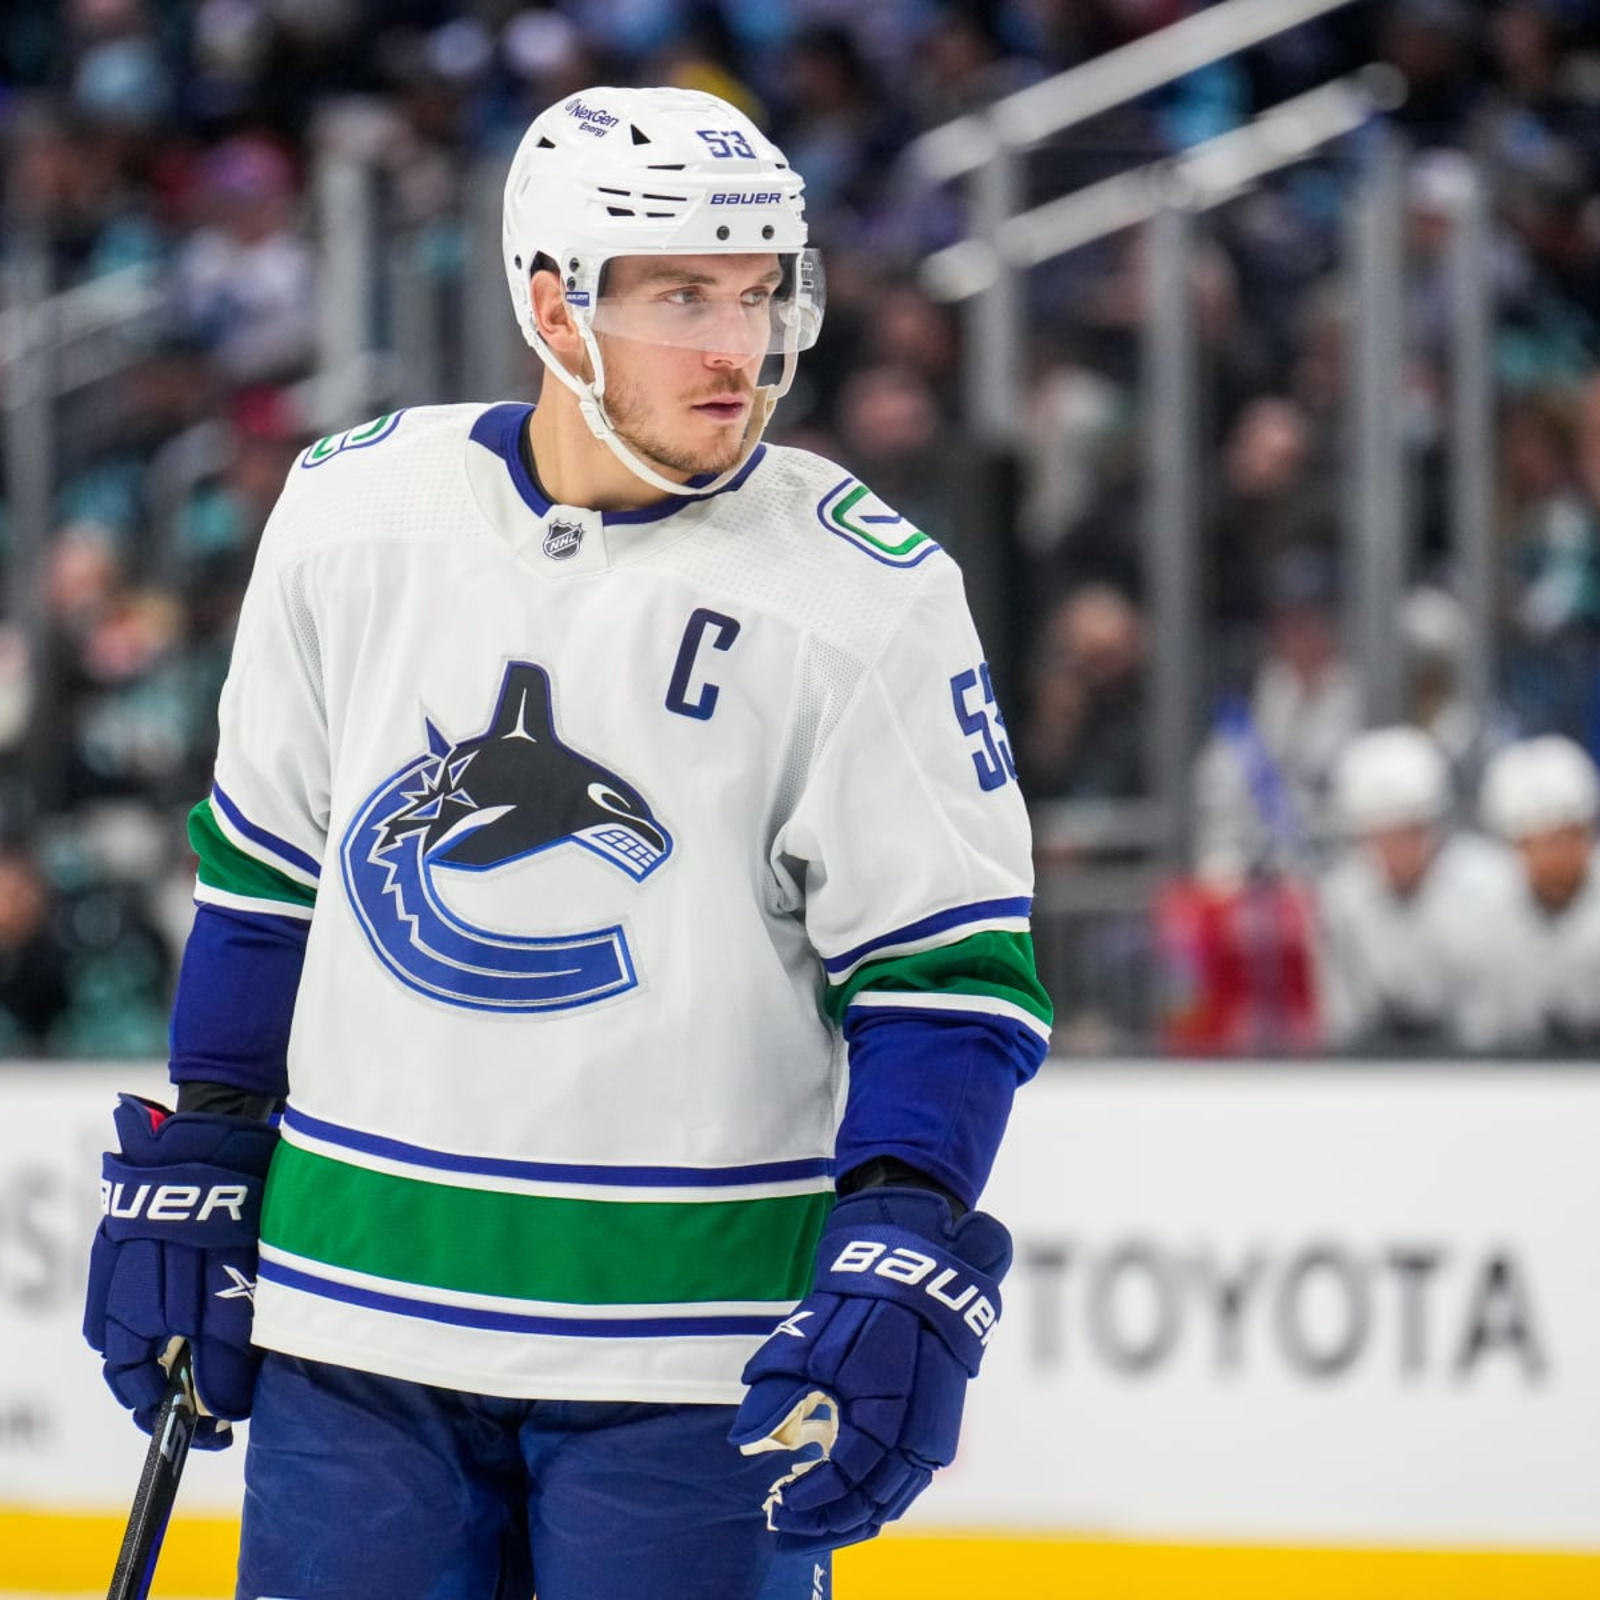 Canucks 2022 offseason moves: Where are they better? And where are